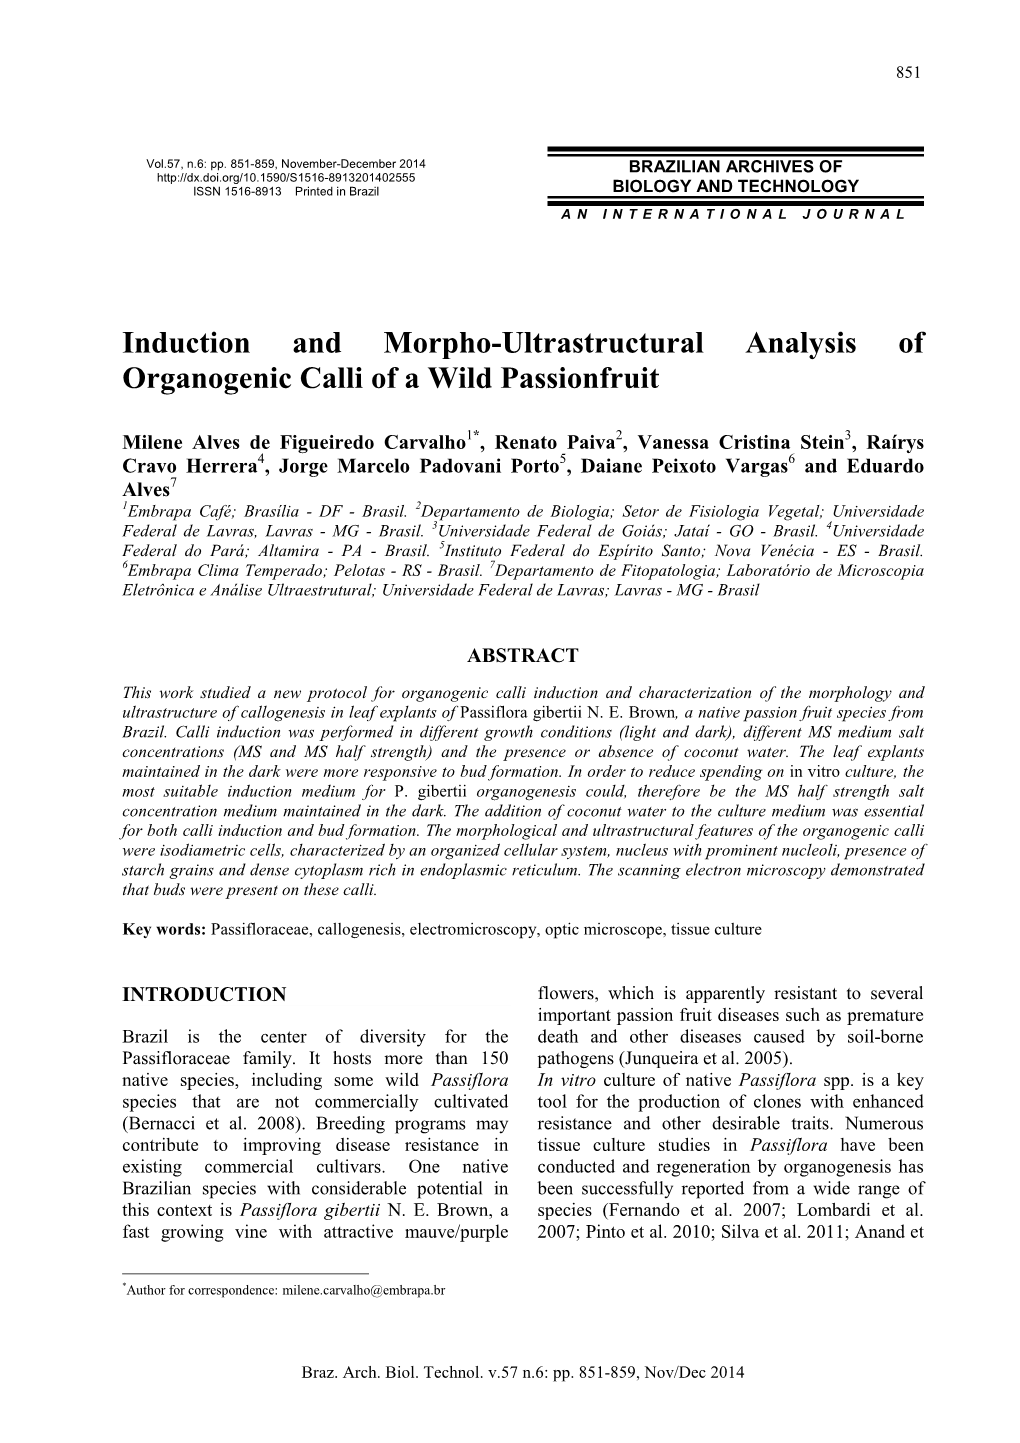 Induction and Morpho-Ultrastructural Analysis of Organogenic Calli of a Wild Passionfruit